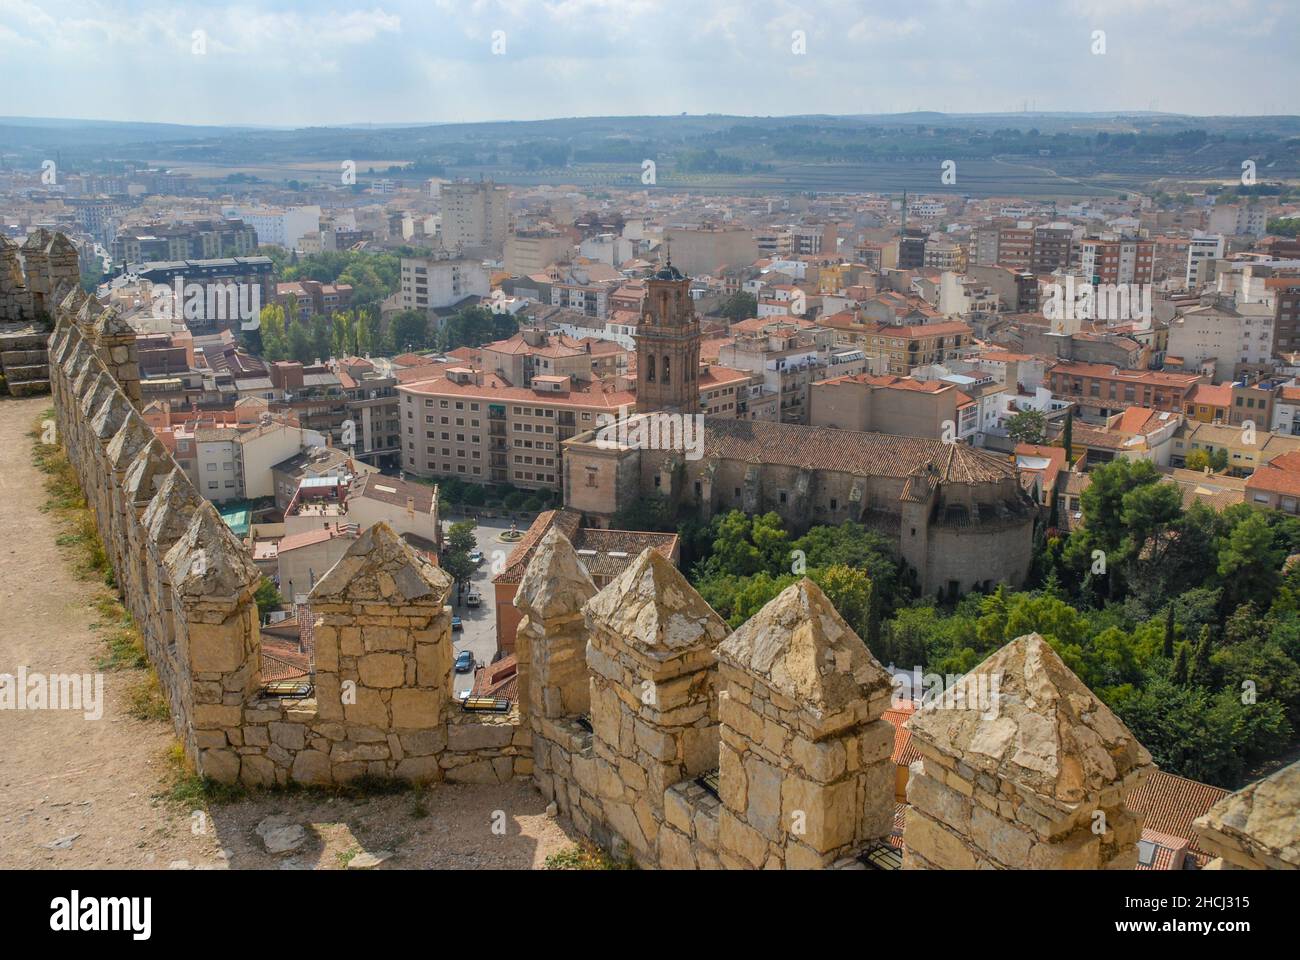 Almansa, Albacete, Spain - view from castle ramparts  to church and city buildings, with plains in the distance. Stock Photo